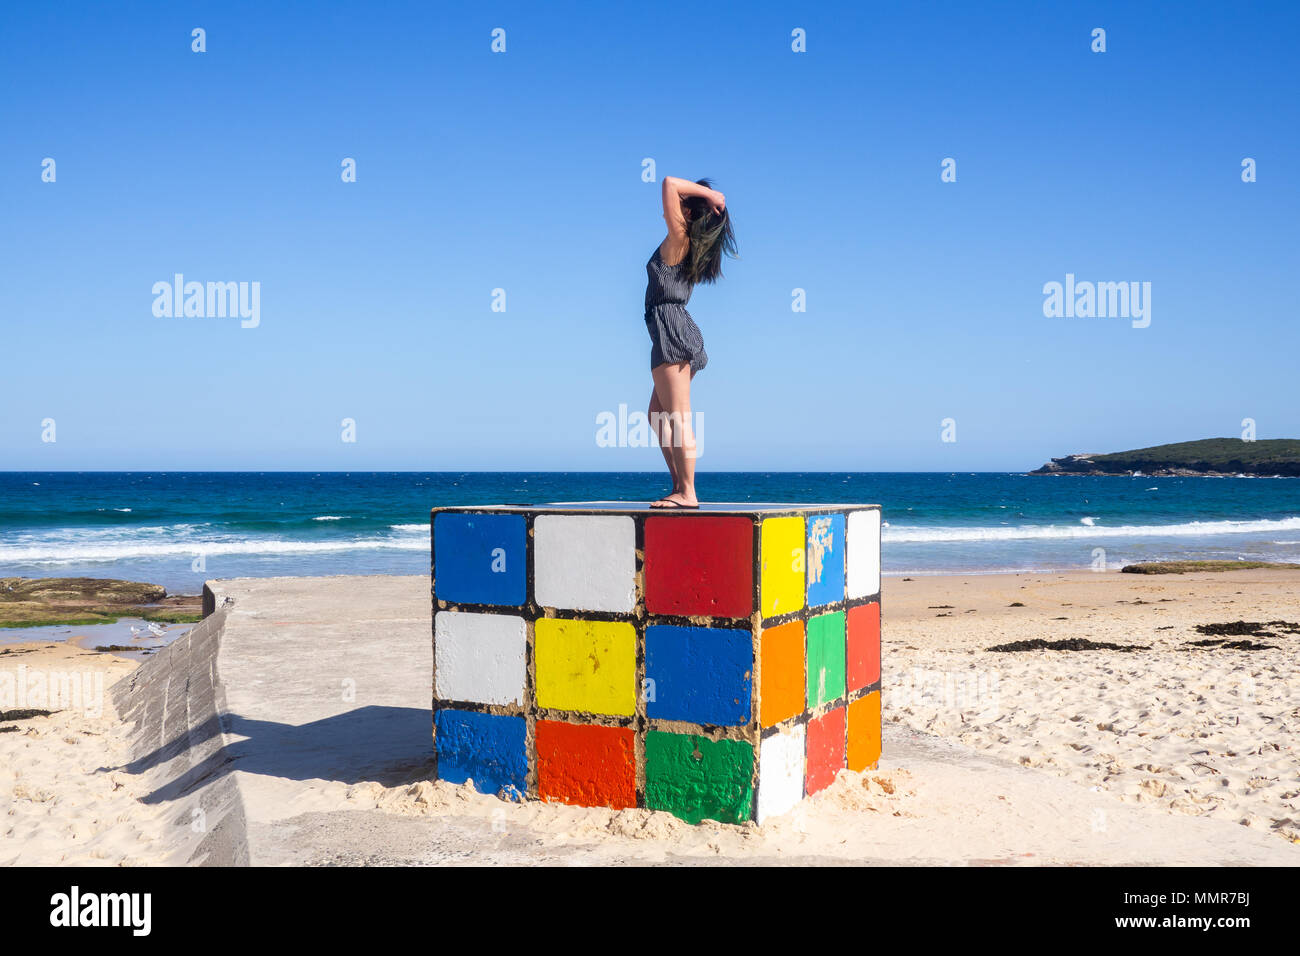 Young woman stands on giant Rubik cube at Maroubra Beach, Sydney, Australia Stock Photo